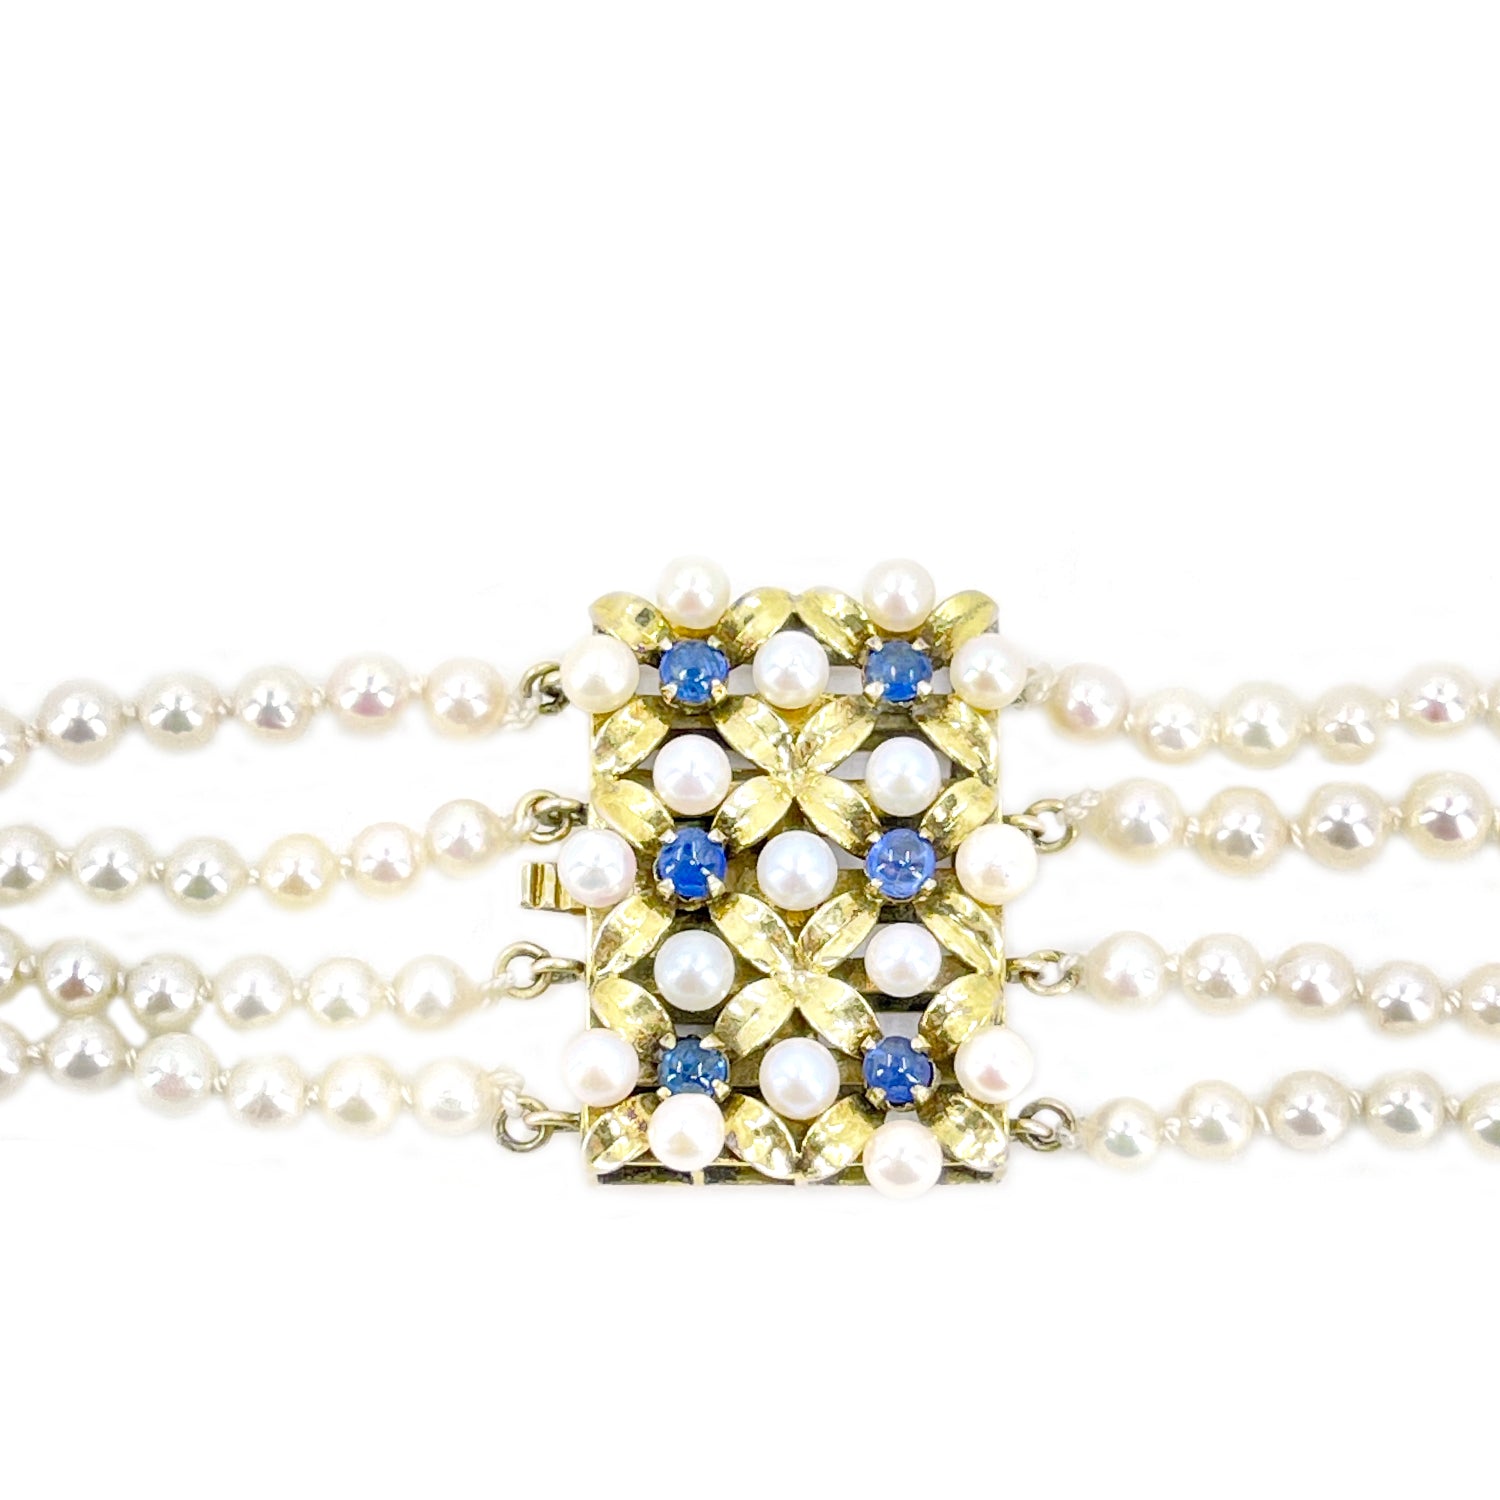 Four Strand Floral Natural Ceylon Sapphire Japanese Saltwater Cultured Akoya Seed Pearl Necklace - 14K Yellow Gold 22-25.50 Inch